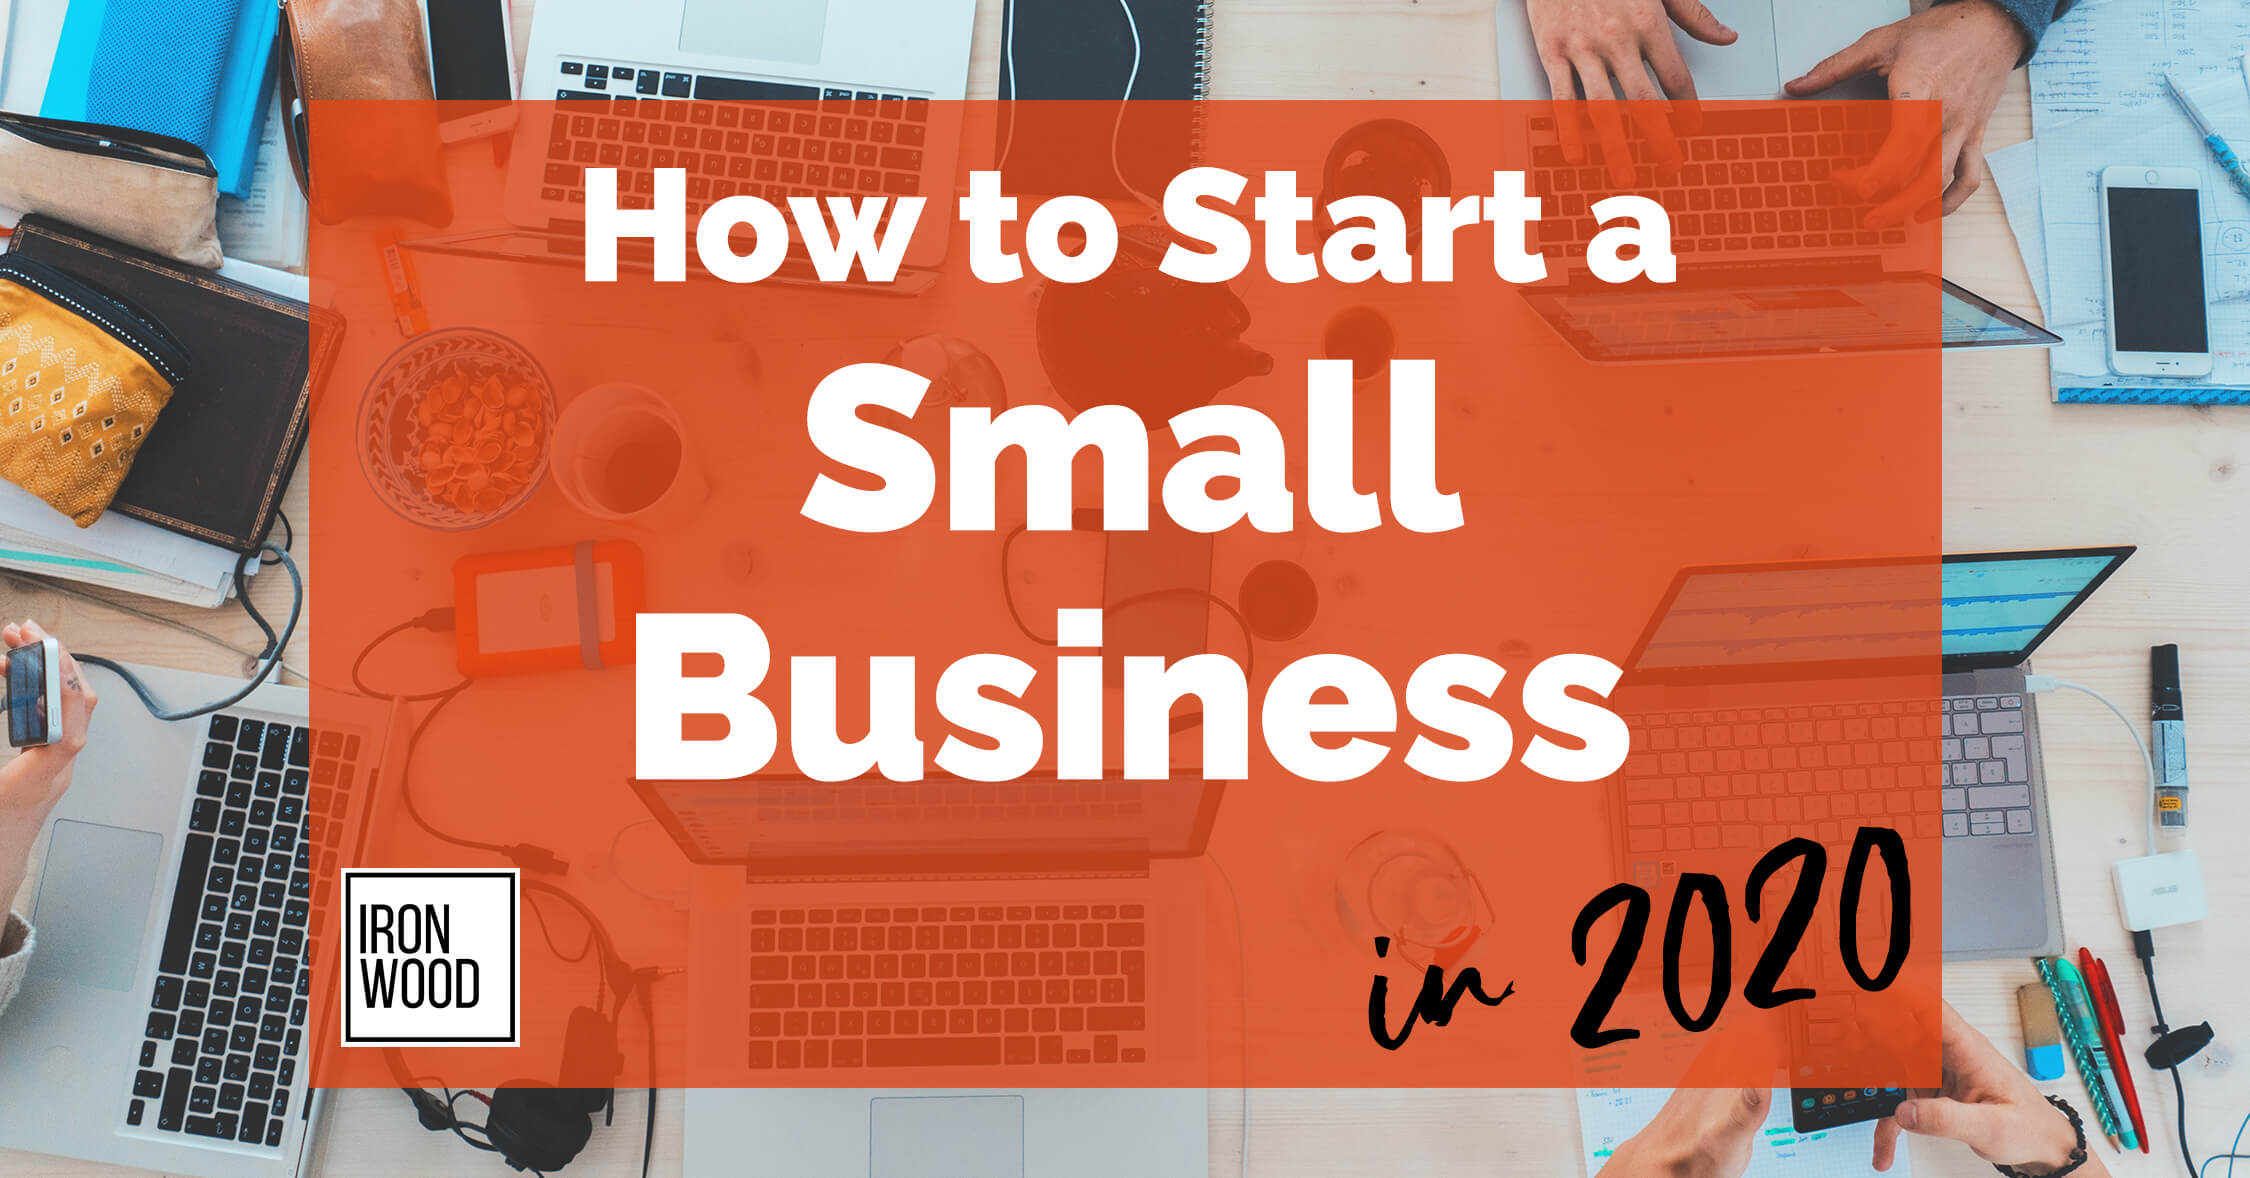 Tips for Starting Your Small Business, ironwood, finance, funding, small business tips, startup, business advice